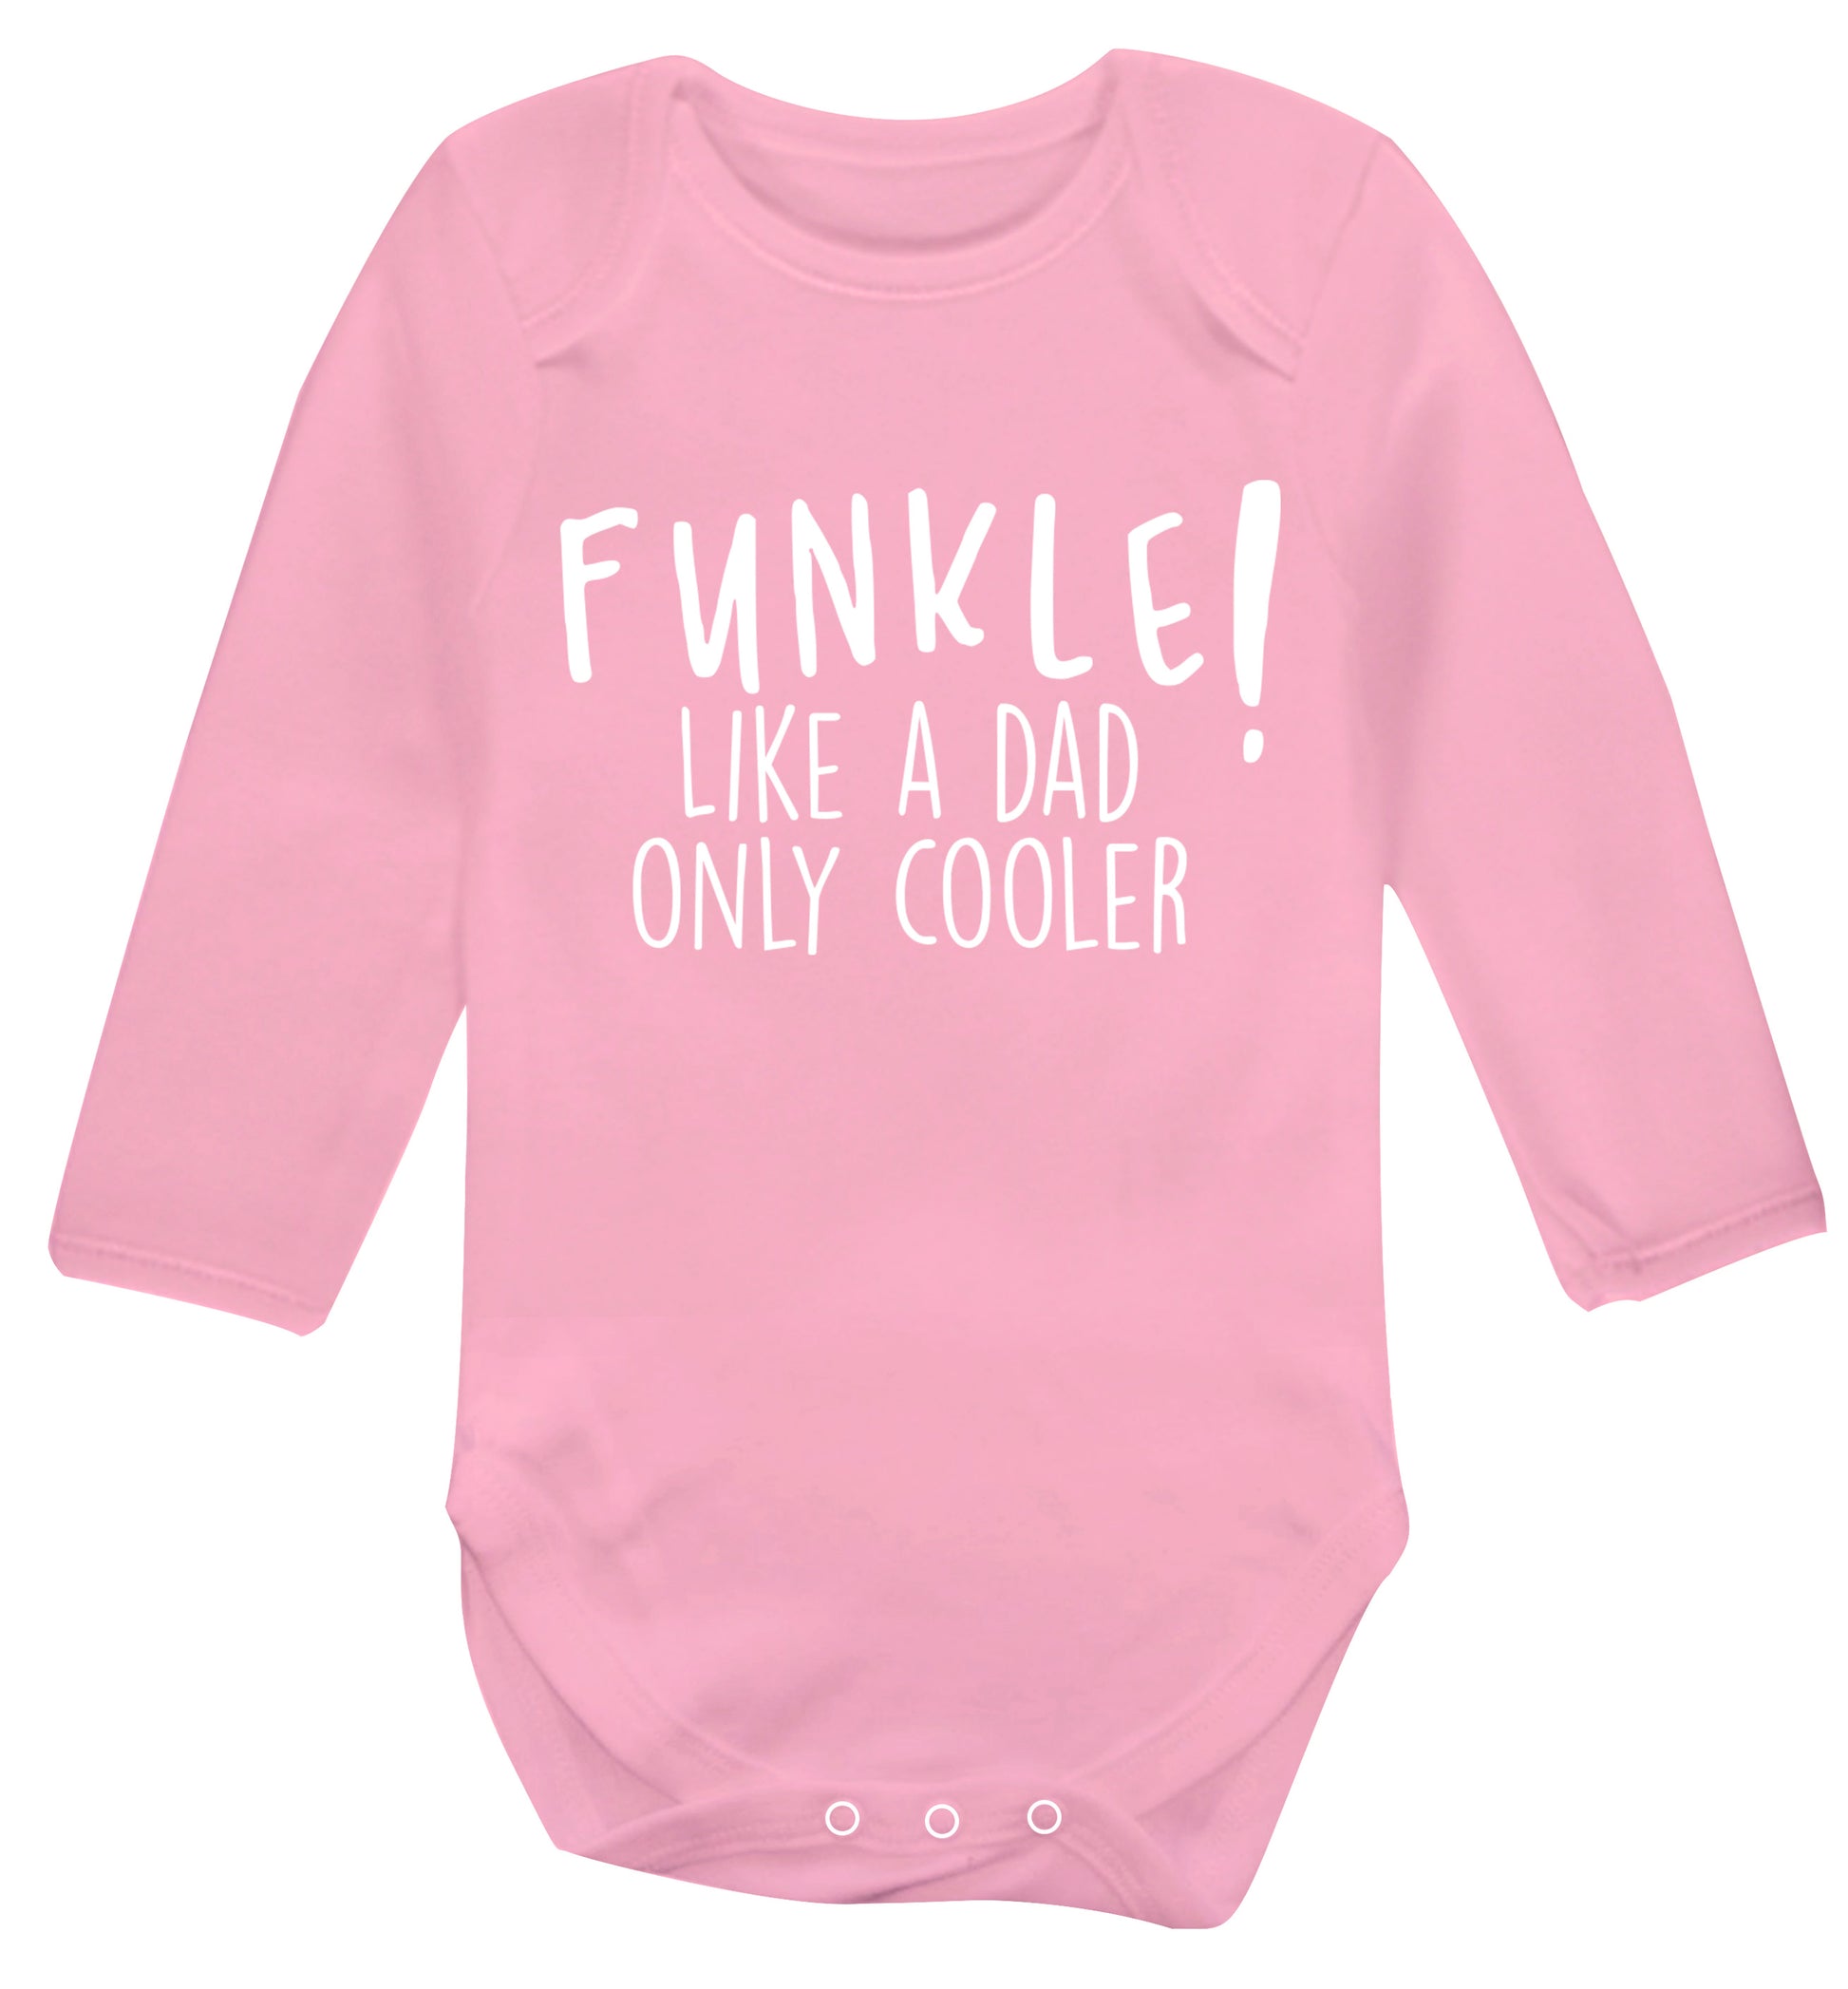 Funkle Like a Dad Only Cooler Baby Vest long sleeved pale pink 6-12 months